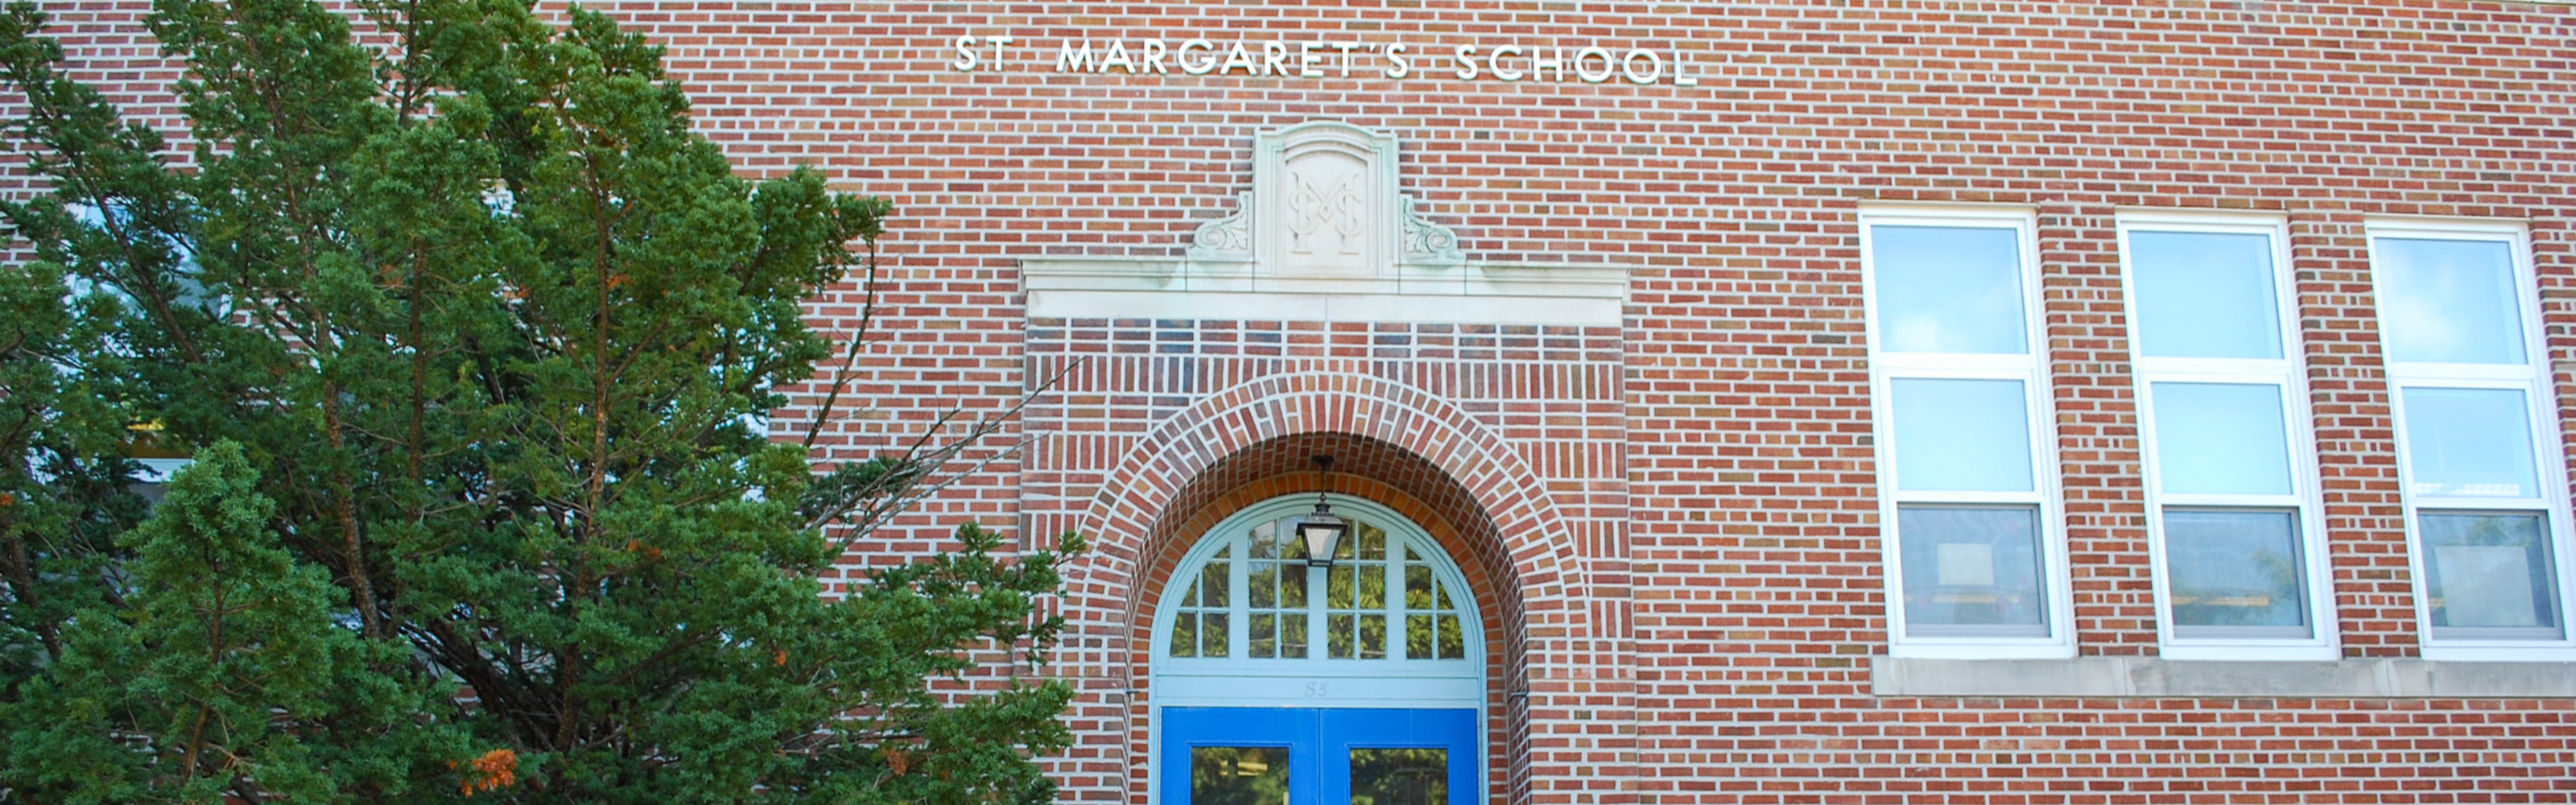 The front of the St. Margaret Catholic School building.